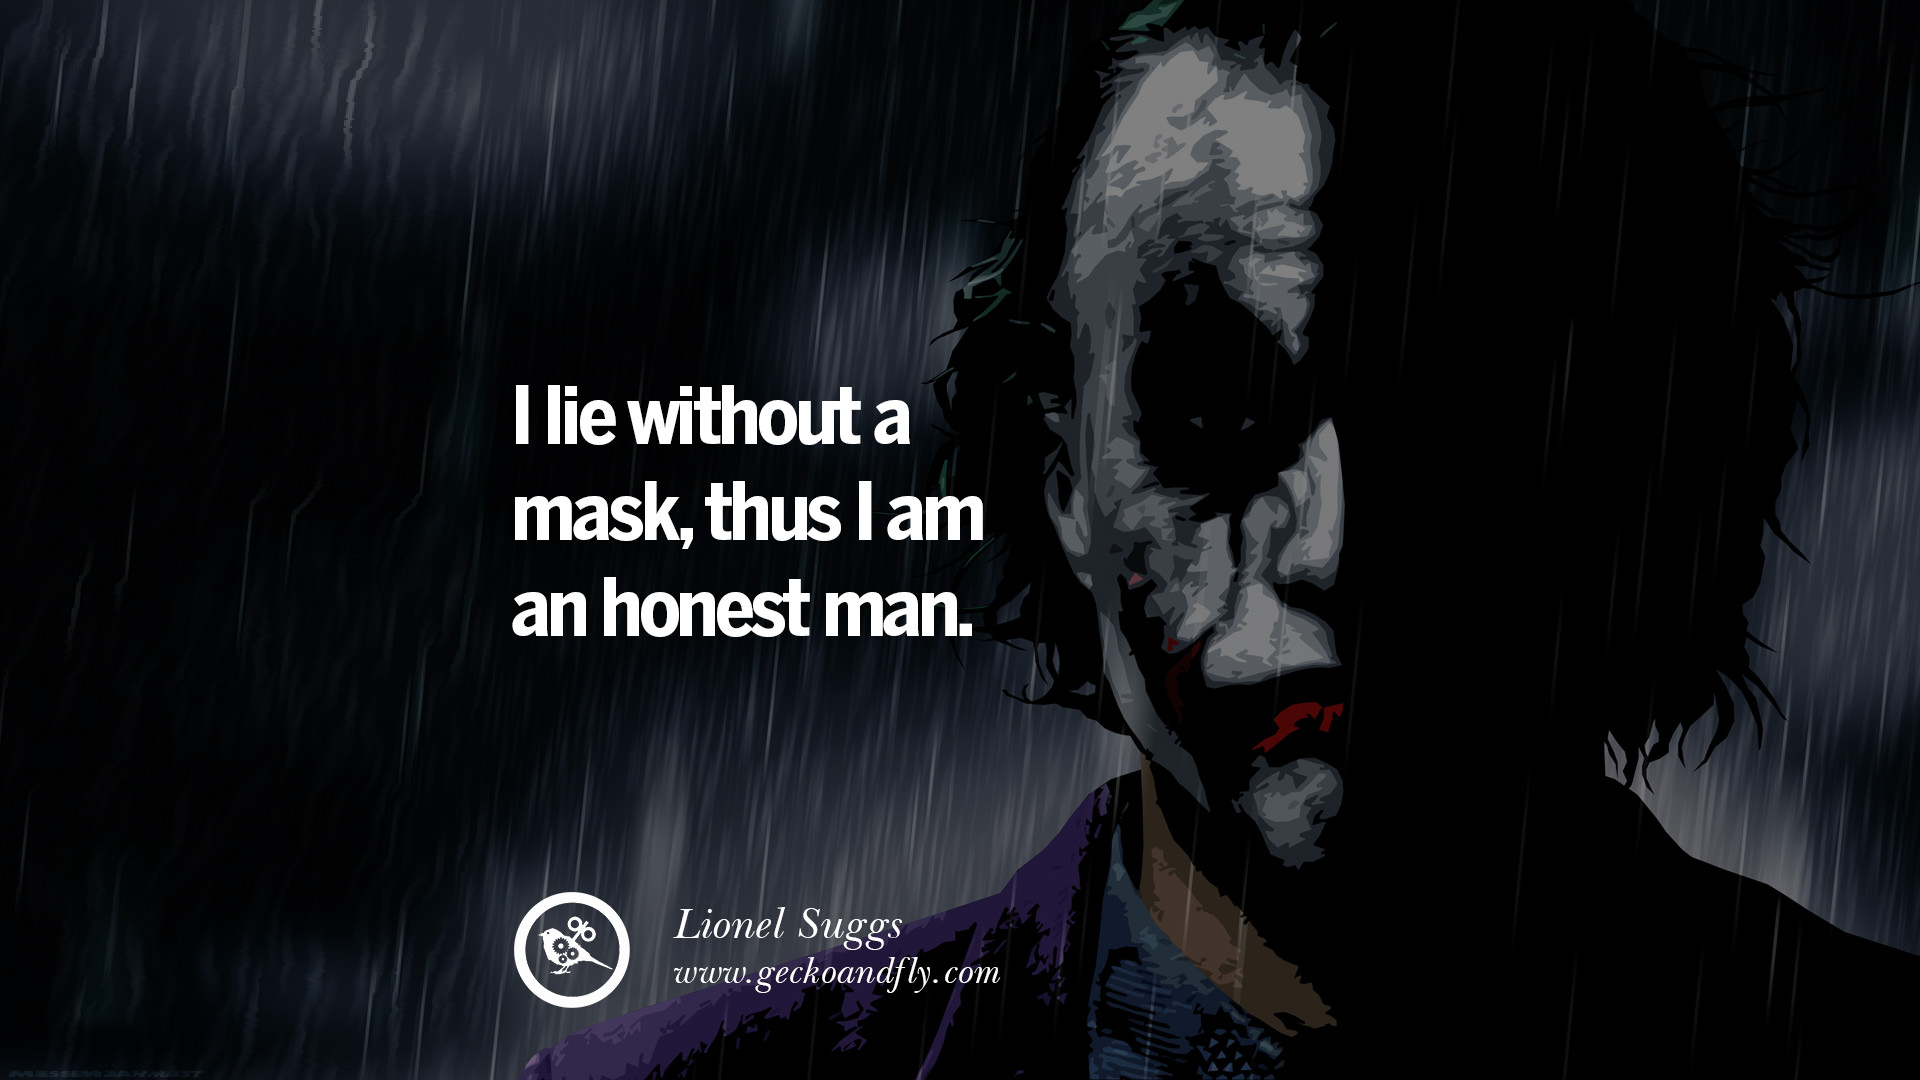 I lie without a mask thus I am an honest man Lionel Suggs